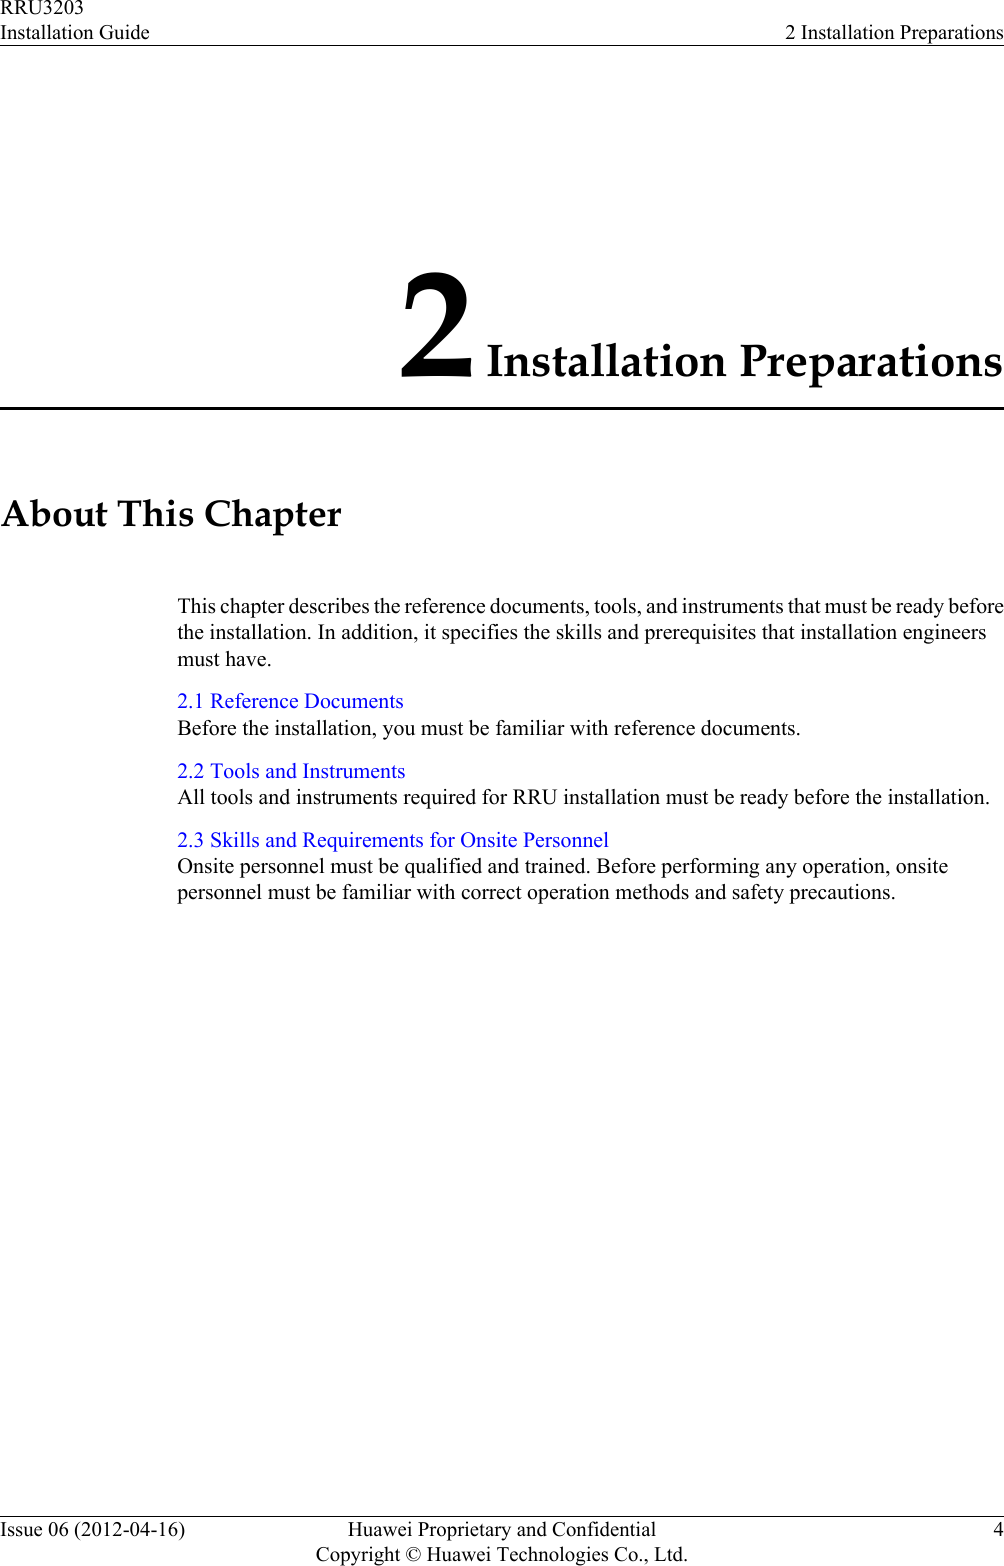 2 Installation PreparationsAbout This ChapterThis chapter describes the reference documents, tools, and instruments that must be ready beforethe installation. In addition, it specifies the skills and prerequisites that installation engineersmust have.2.1 Reference DocumentsBefore the installation, you must be familiar with reference documents.2.2 Tools and InstrumentsAll tools and instruments required for RRU installation must be ready before the installation.2.3 Skills and Requirements for Onsite PersonnelOnsite personnel must be qualified and trained. Before performing any operation, onsitepersonnel must be familiar with correct operation methods and safety precautions.RRU3203Installation Guide 2 Installation PreparationsIssue 06 (2012-04-16) Huawei Proprietary and ConfidentialCopyright © Huawei Technologies Co., Ltd.4